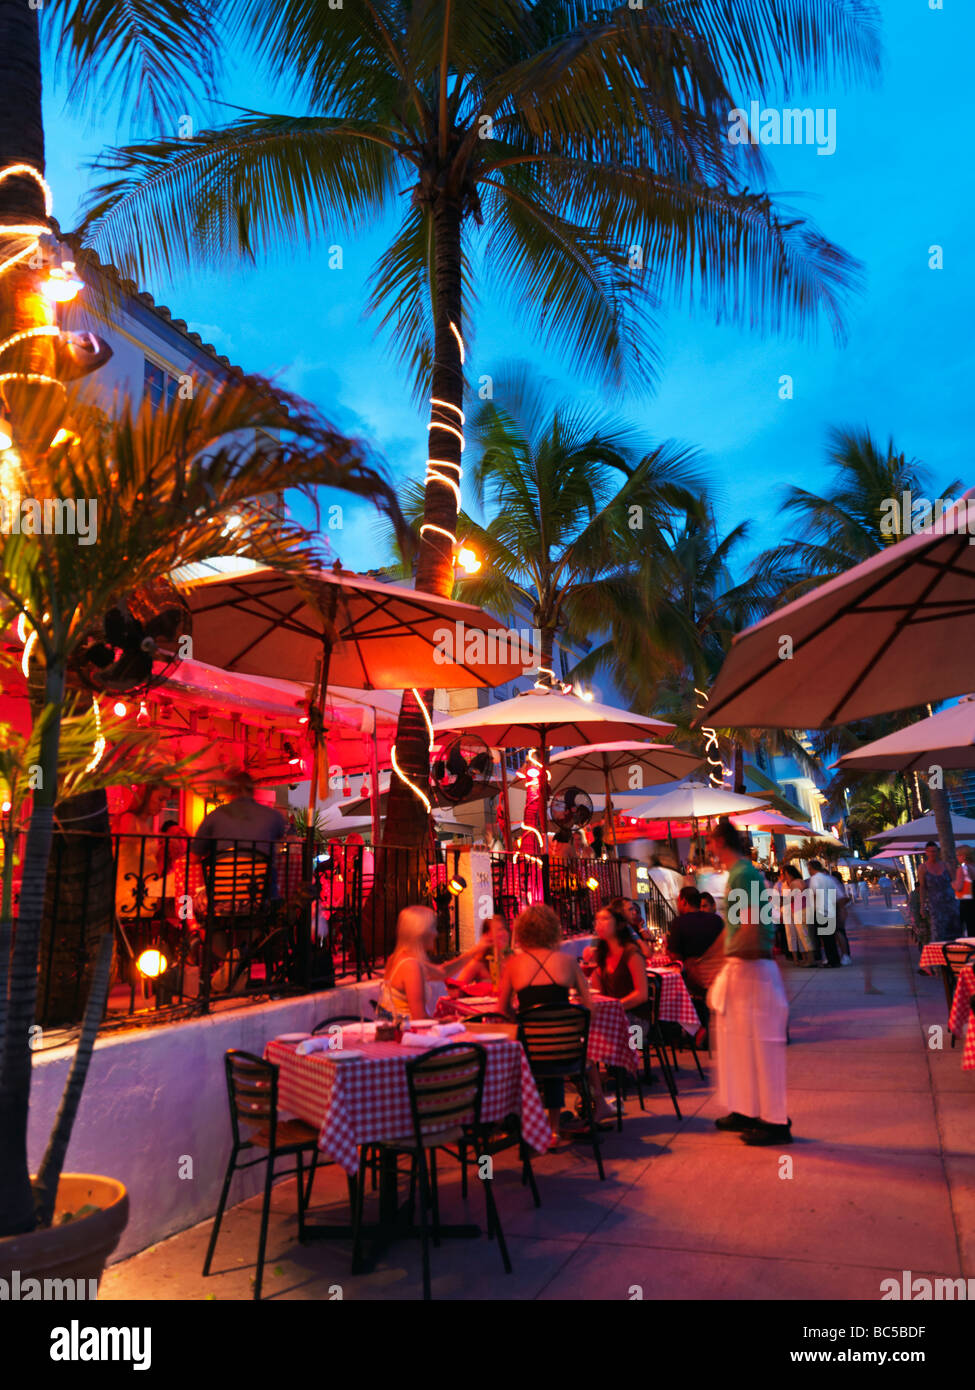 cafes and restaurants at dusk on Ocean Drive in South Beach Miami Stock Photo